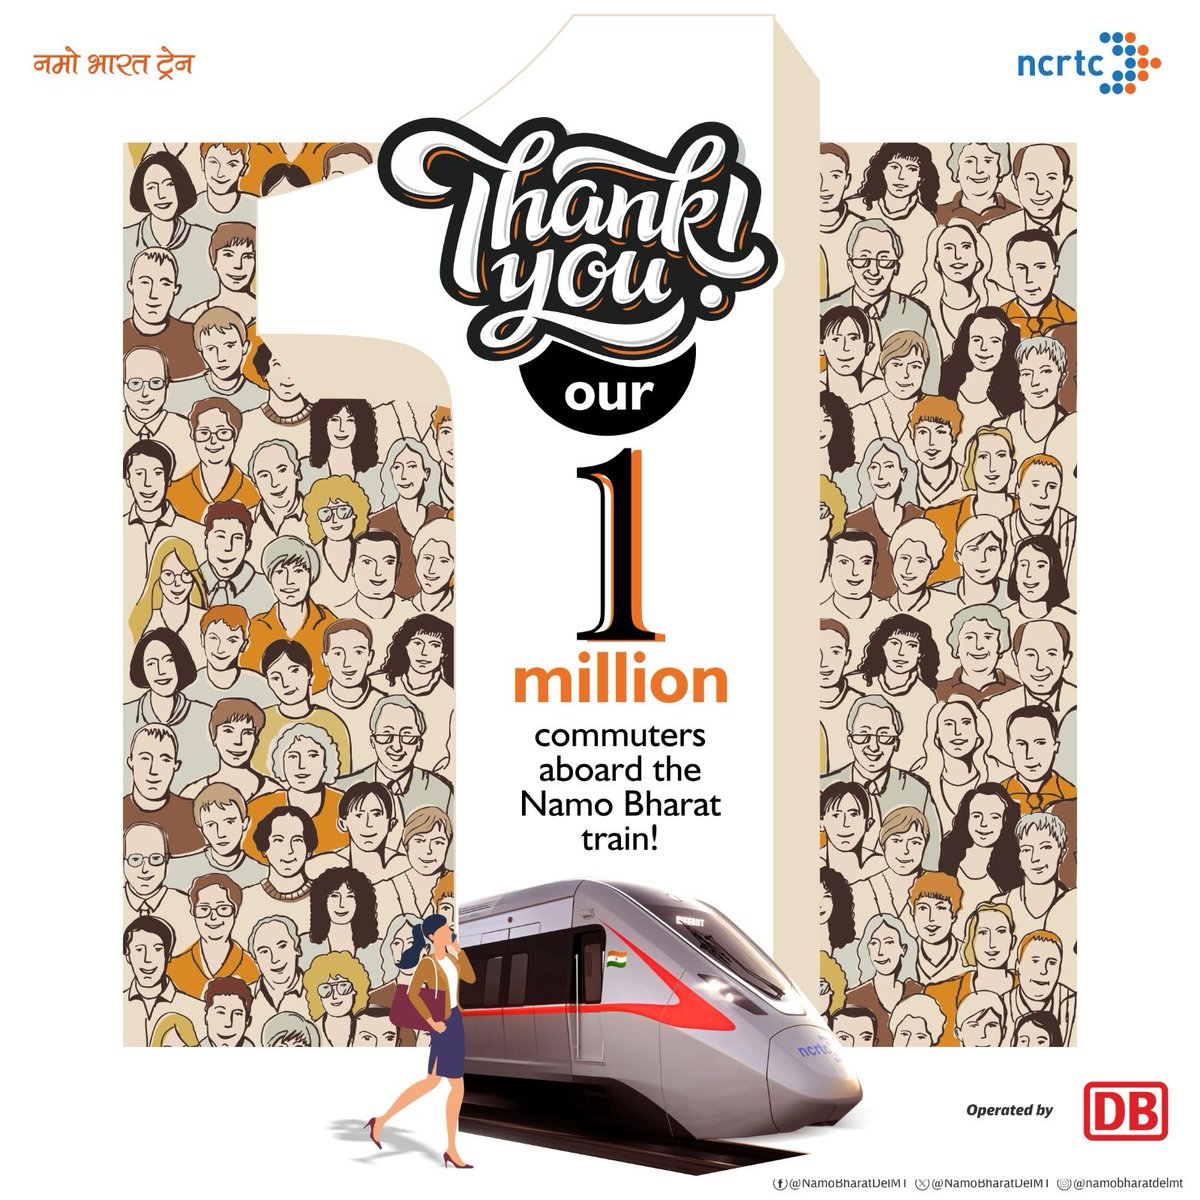 We are proud to share that we have reached the milestone of serving 1 million commuters on #NamoBharat trains! We remain dedicated to bring People & Places closer through fast, safe & comfortable journeys. Thank you for choosing Namo Bharat as your transit partner! #GatiShakti